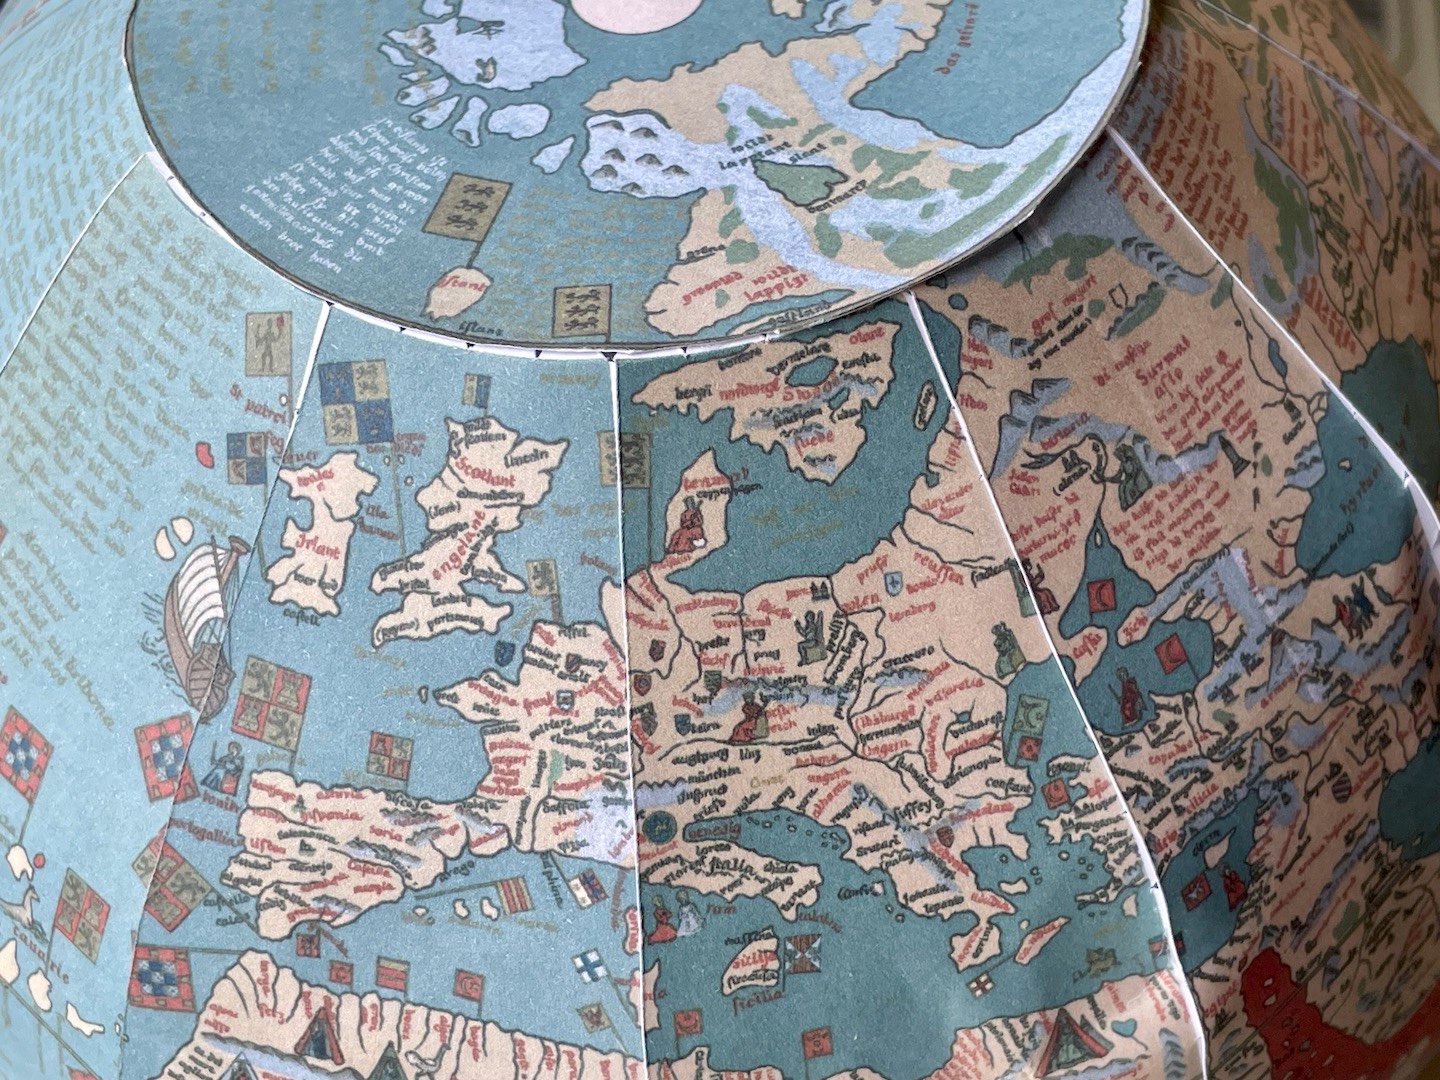 Photograph of the paper globe, showing Europe and part of the north pole.